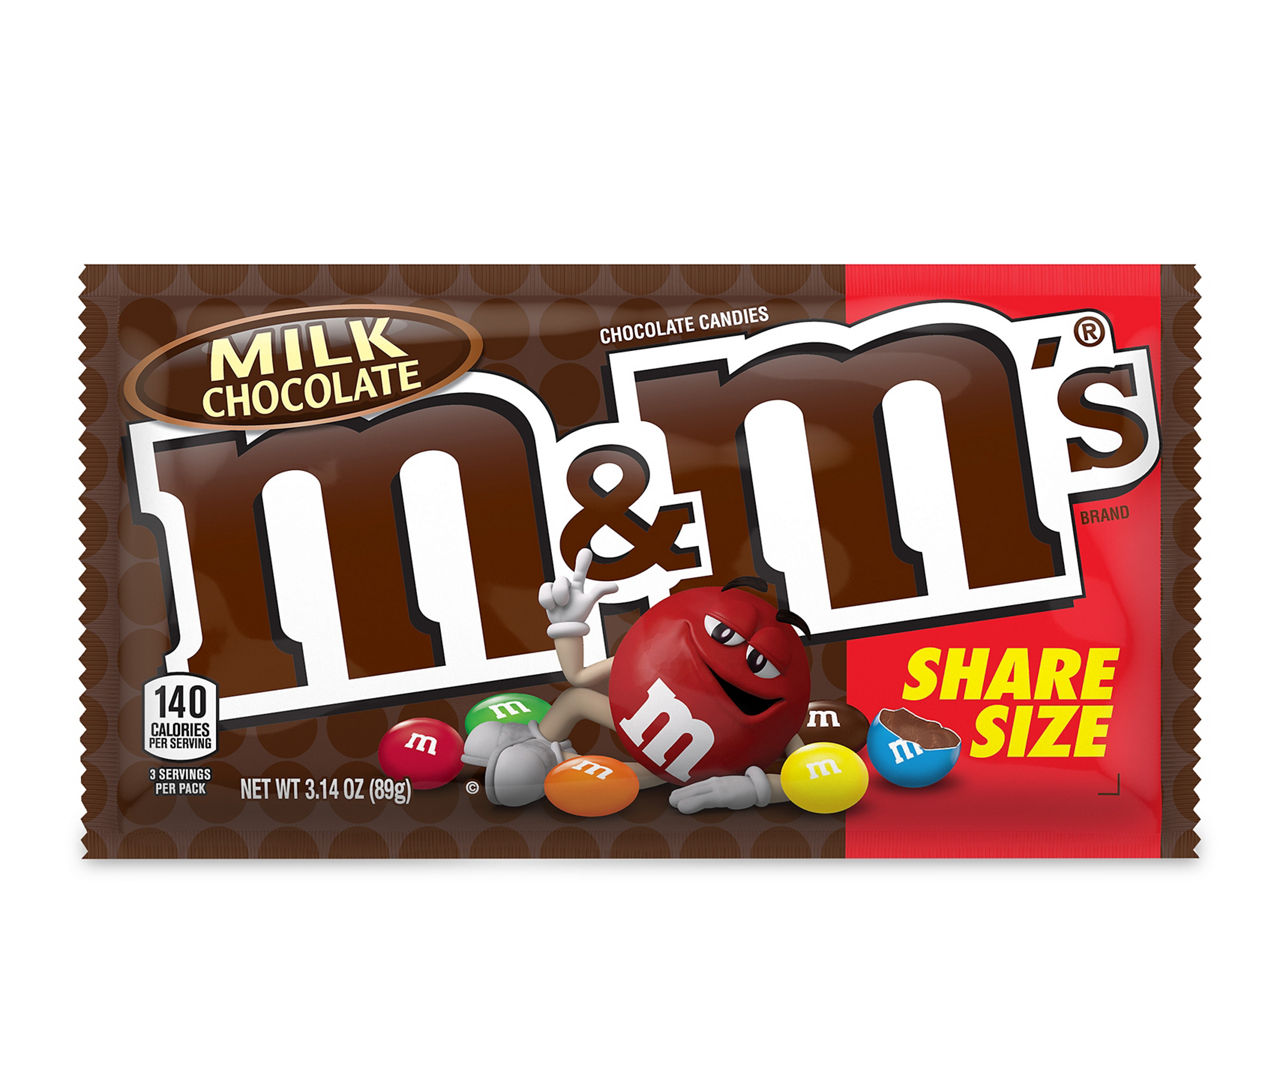  M&M'S Classic Mix Chocolate Candy Sharing Size Bag